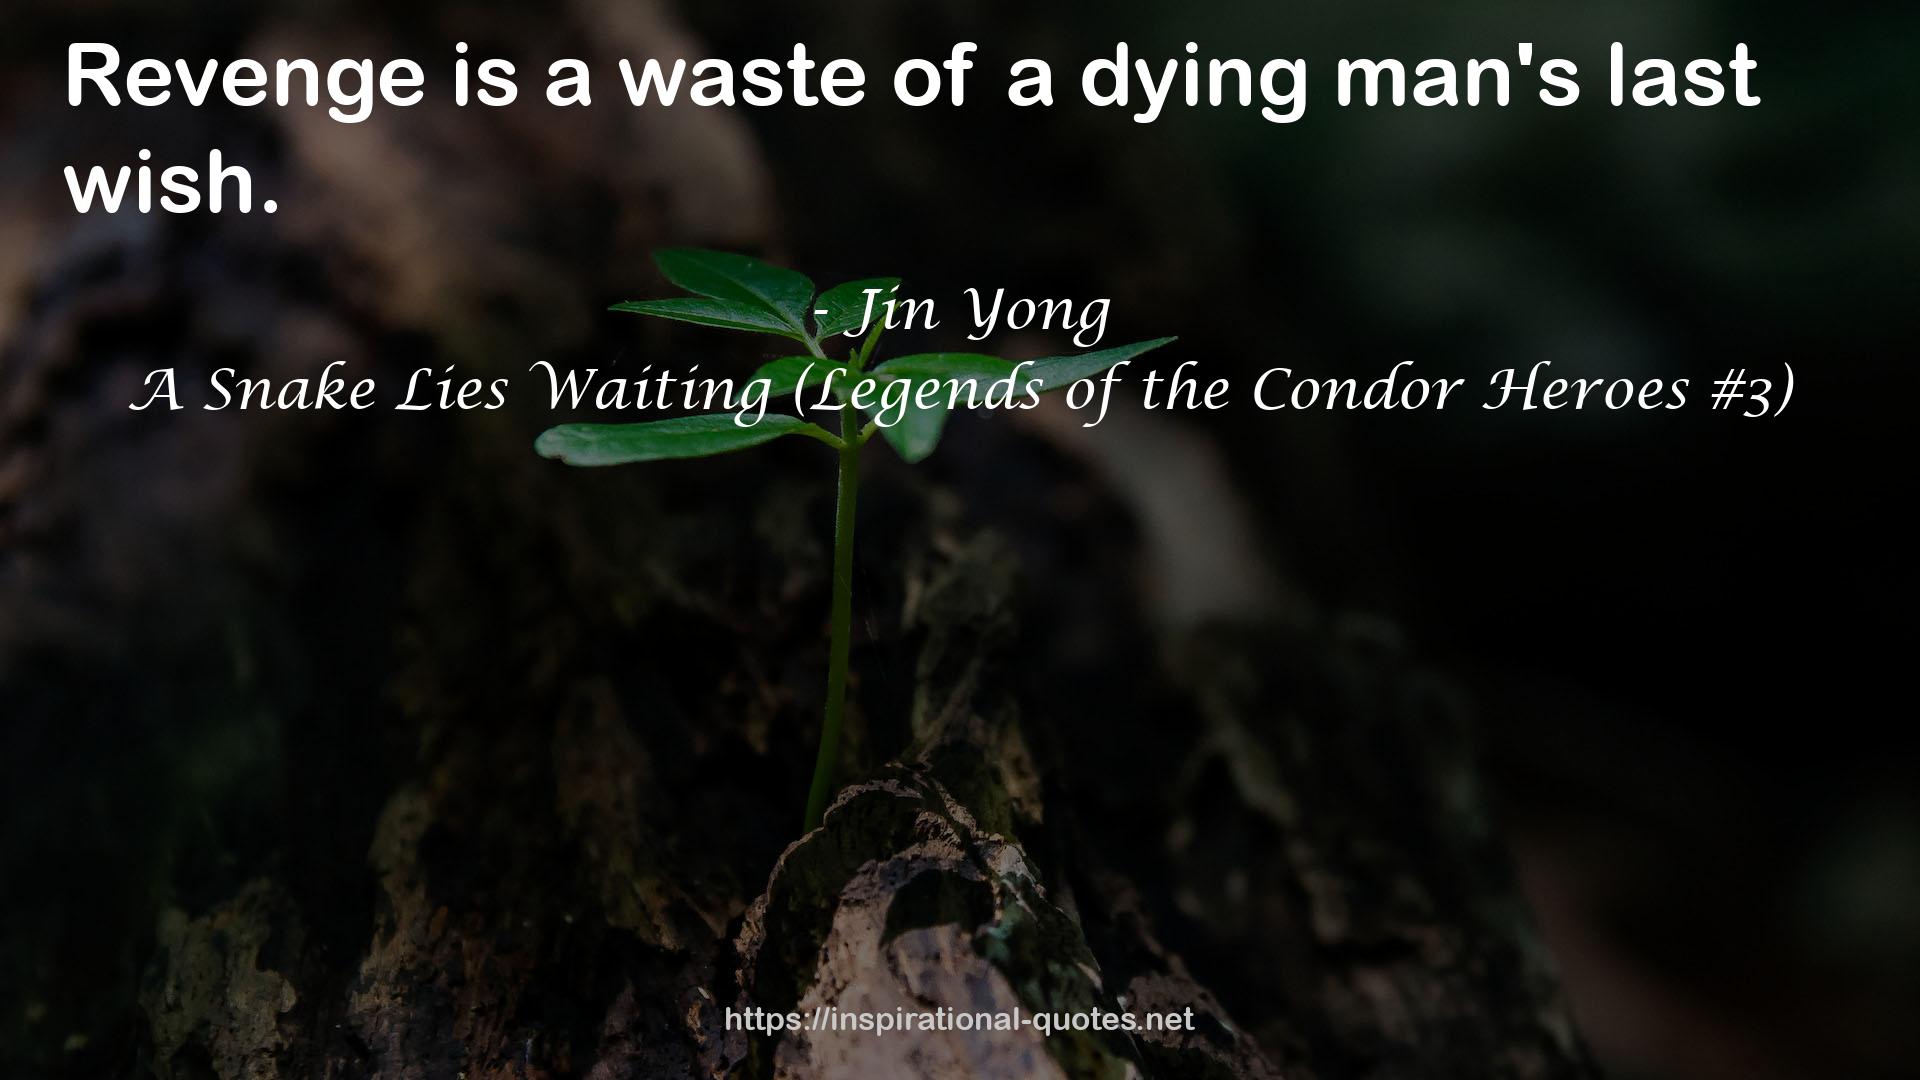 A Snake Lies Waiting (Legends of the Condor Heroes #3) QUOTES